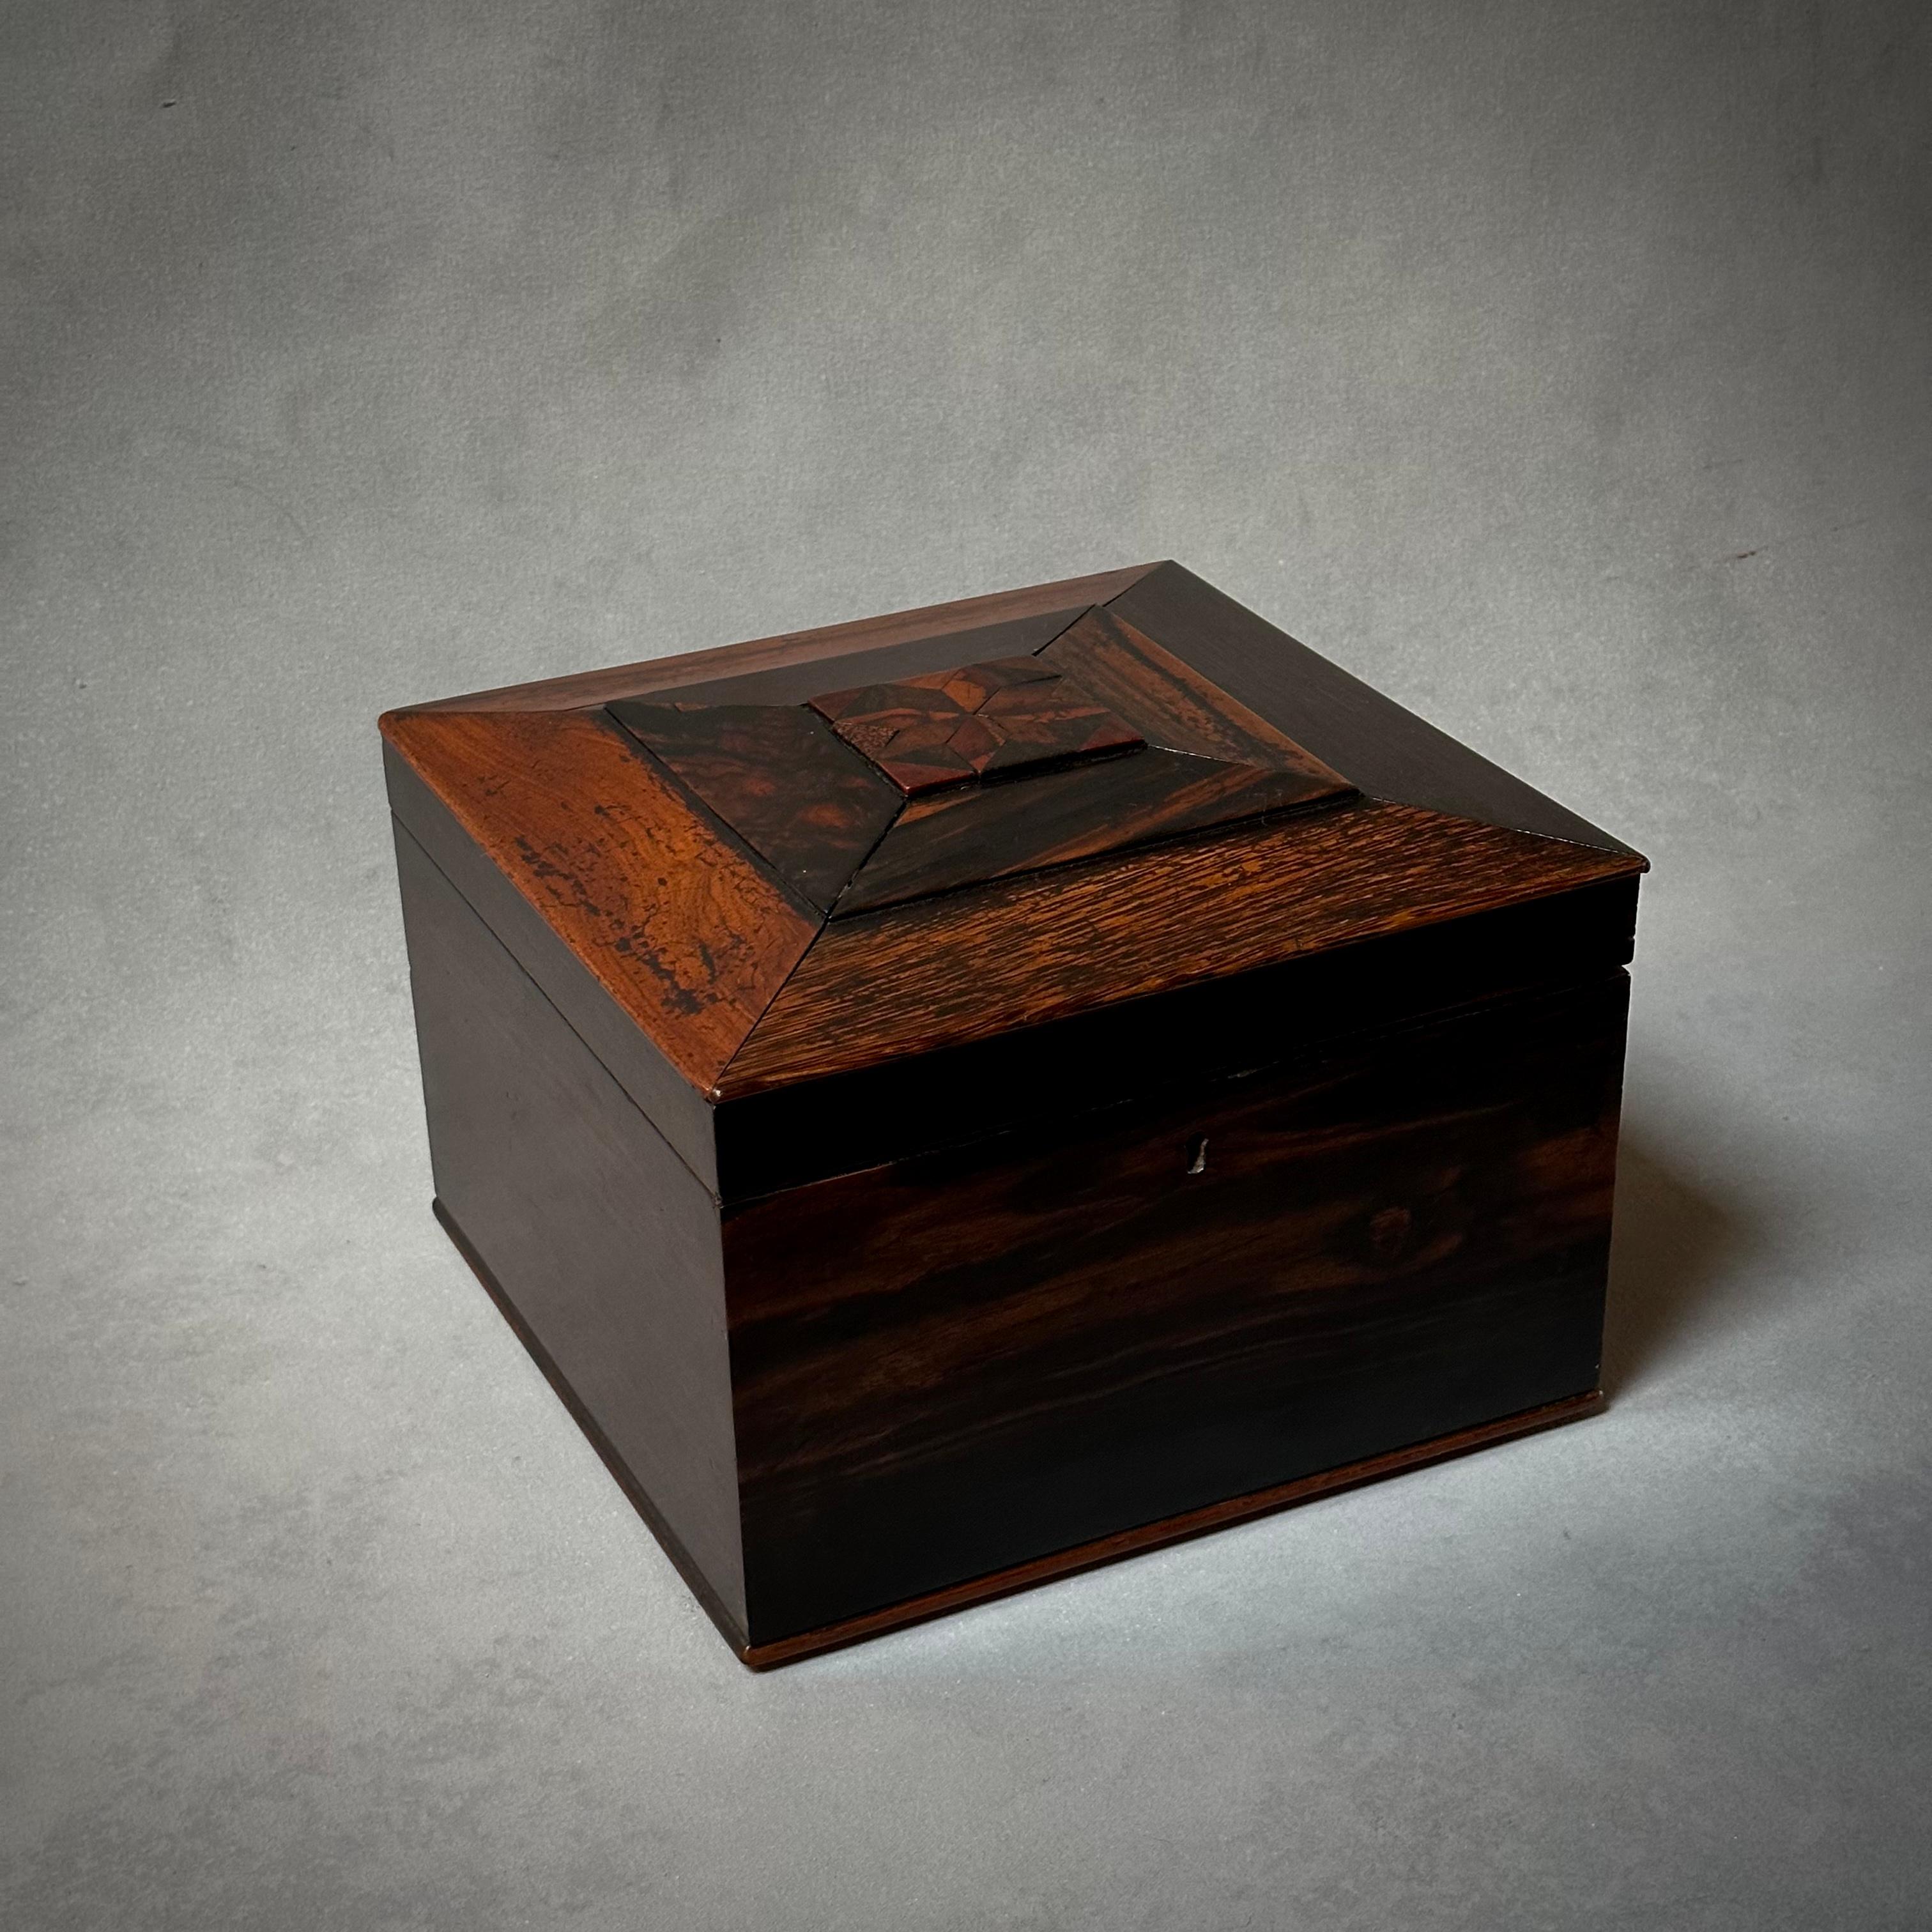 19th Century English rosewood and mahogany square lidded box featuring decorative inlaid top with graphic beveling. A subtle, handsome piece with exquisite detailing. 

England, circa 1860

Dimensions: 11W x 11.5D x 7.5H